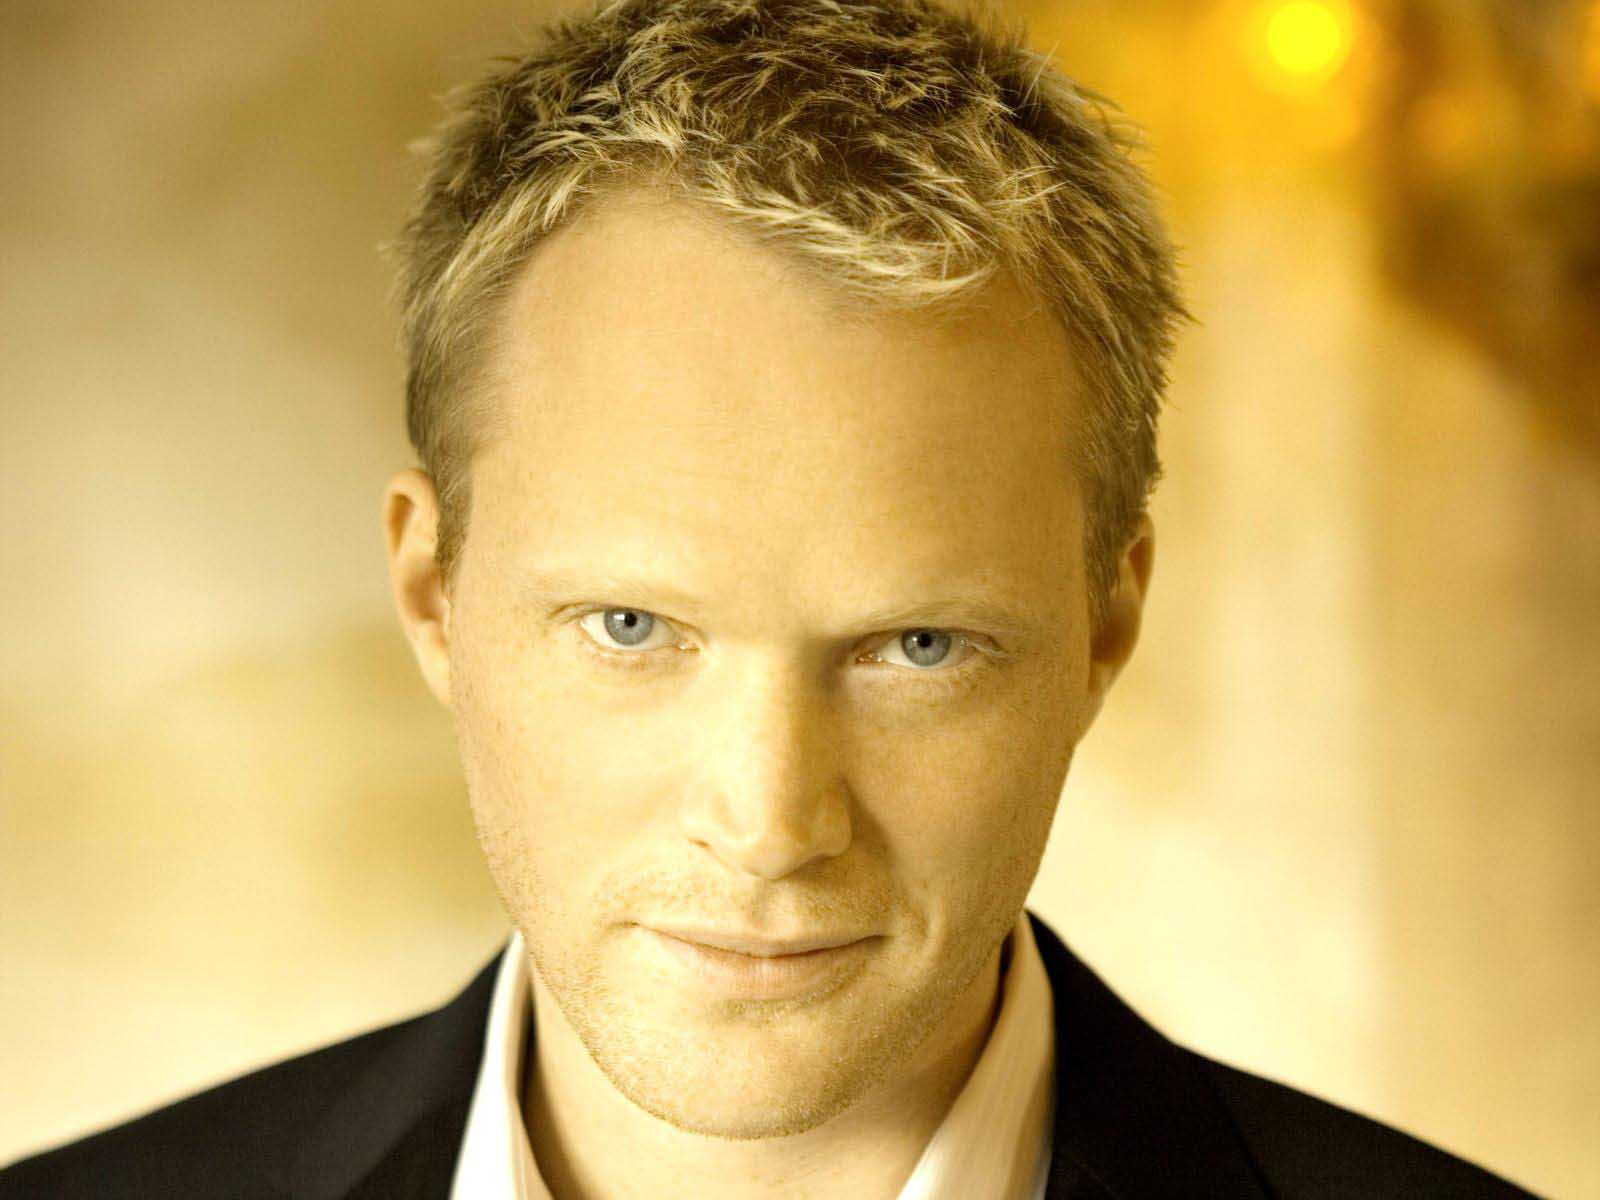 Paul Bettany Wallpaper High Resolution And Quality